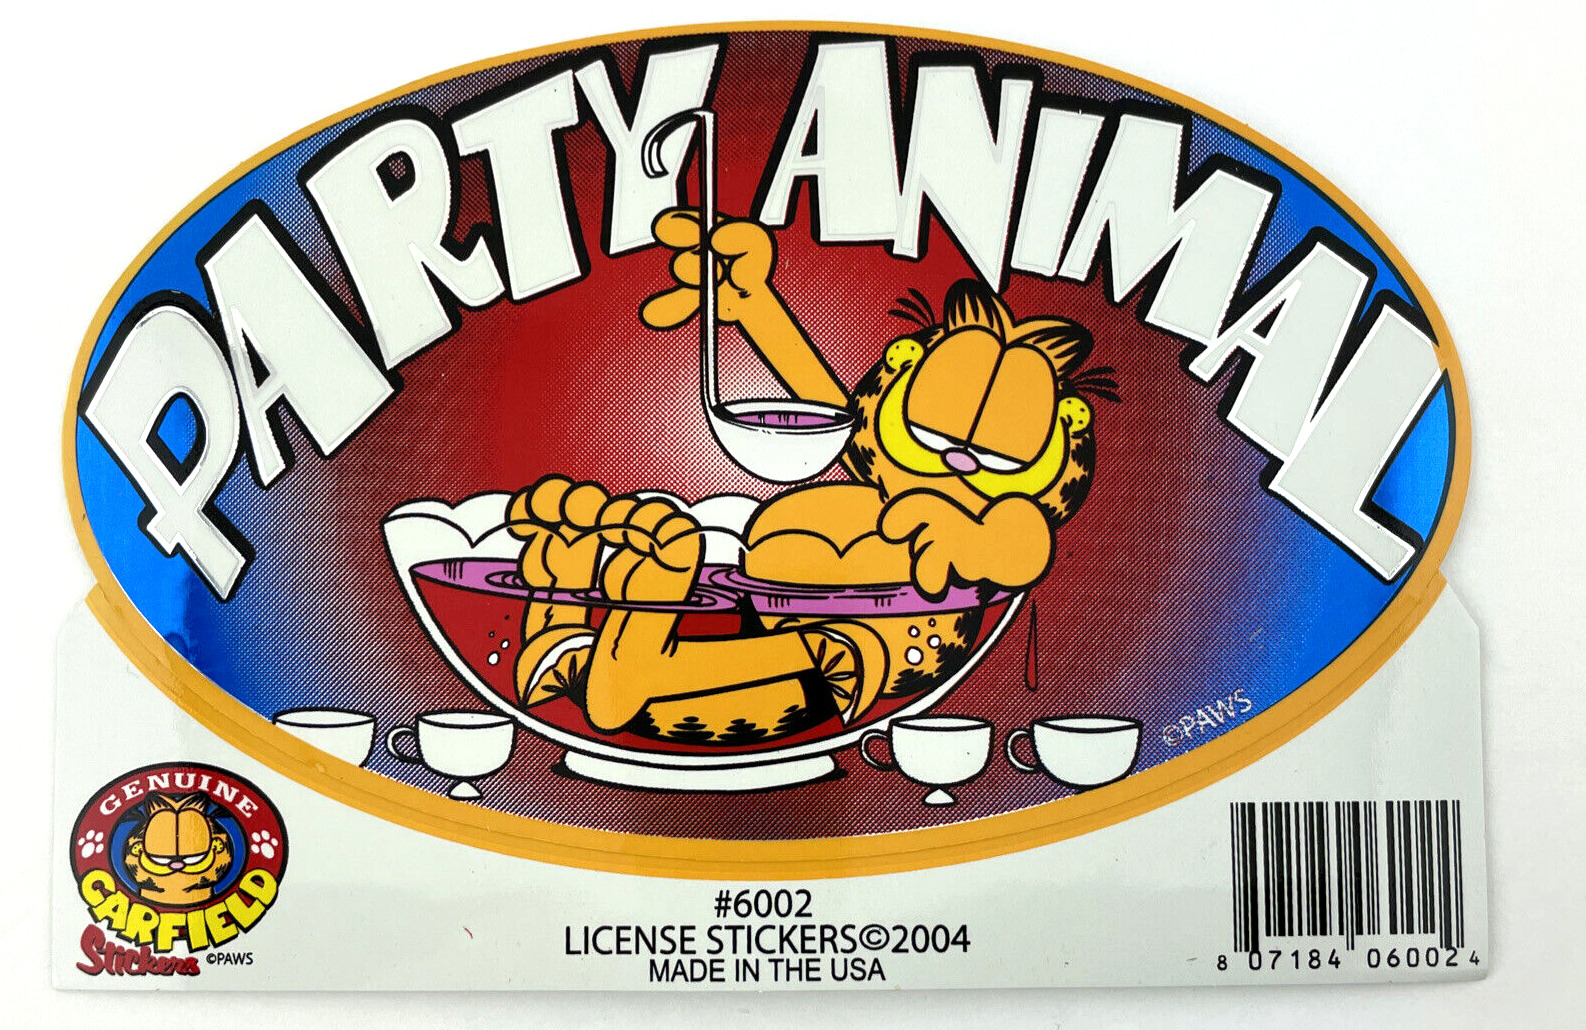 Garfield Cat  Sticker Party Animal Funny New Years Eve Punch Bowl  6x3.5